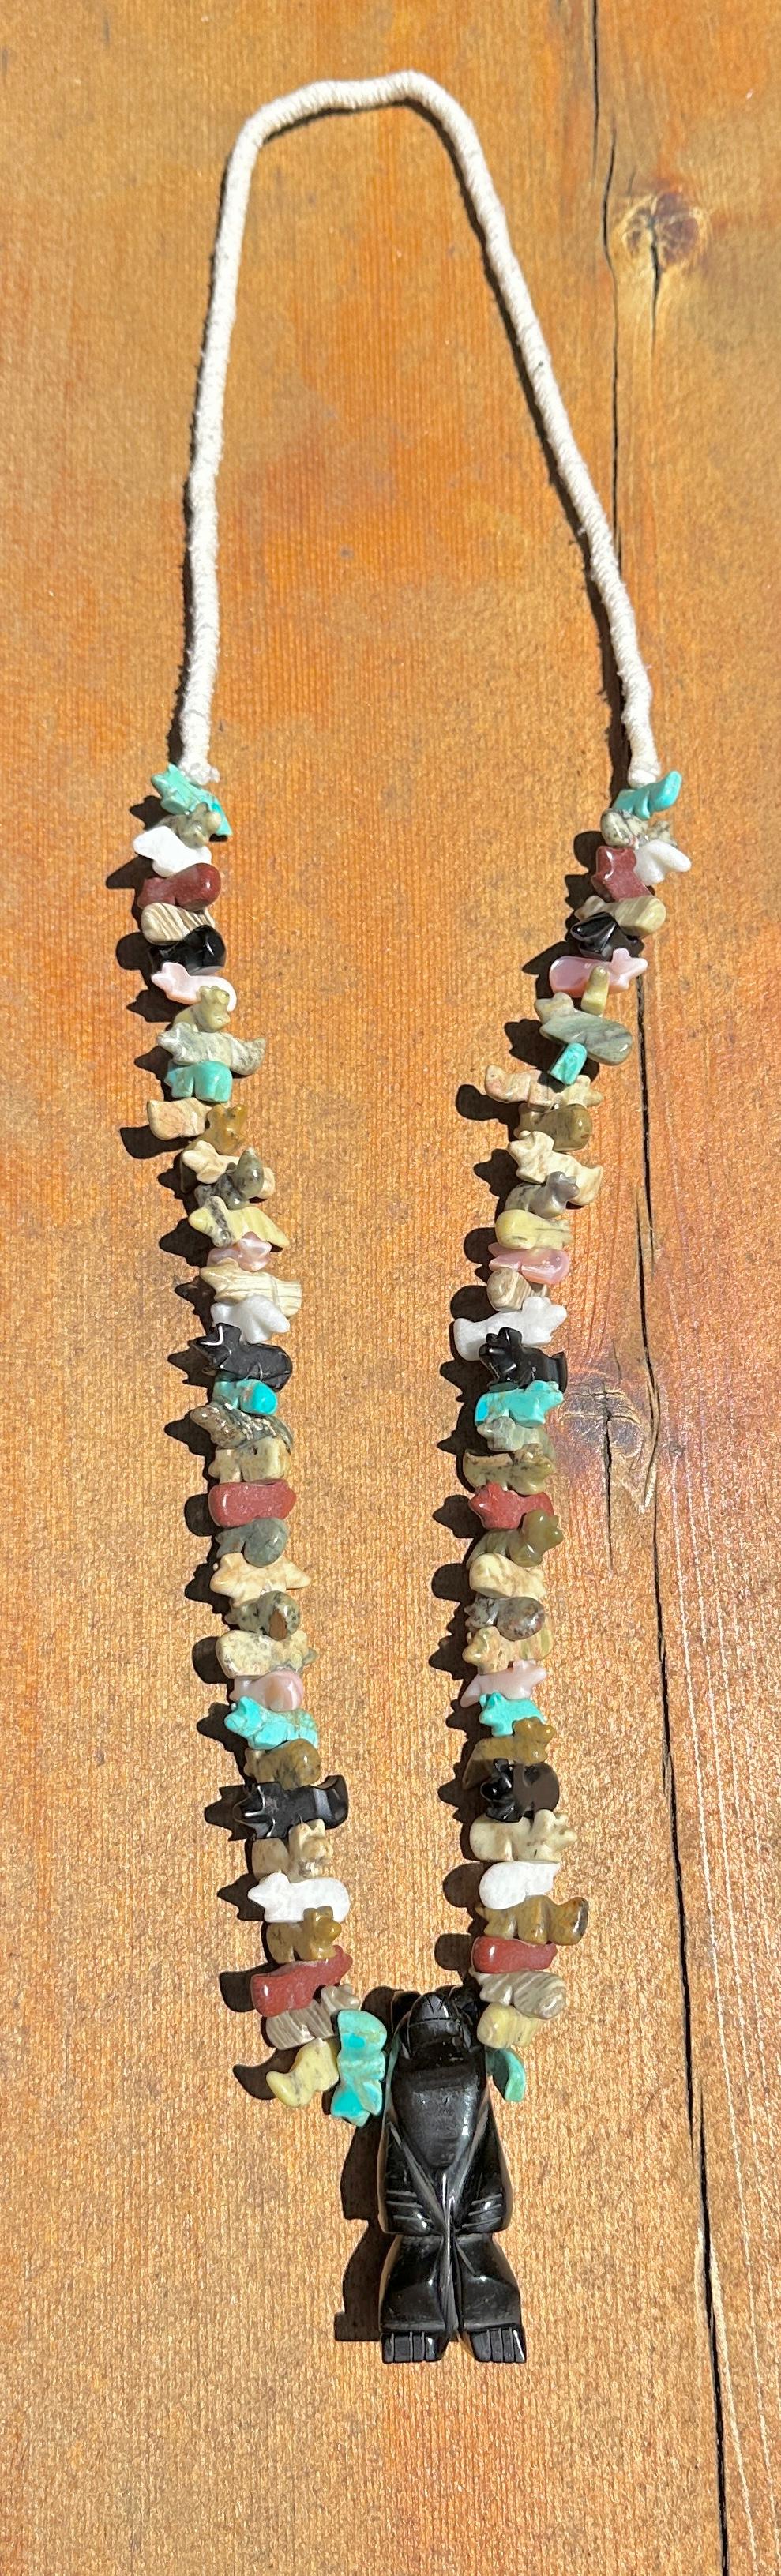 THIS IS A MAGNIFICENT ANTIQUE NATIVE AMERICAN INDIAN ZUNI SLEEPING BEAUTY TURQUOISE, JET, AGATE, PIPESTONE, MOTHER OF PEARL BEAR, ANIMAL FETISH NECKLACE WITH 77 SMALL FETISH ANIMALS AND A WONDERFUL LARGE BLACK JET BEAR IN THE NAJA CENTER!
The